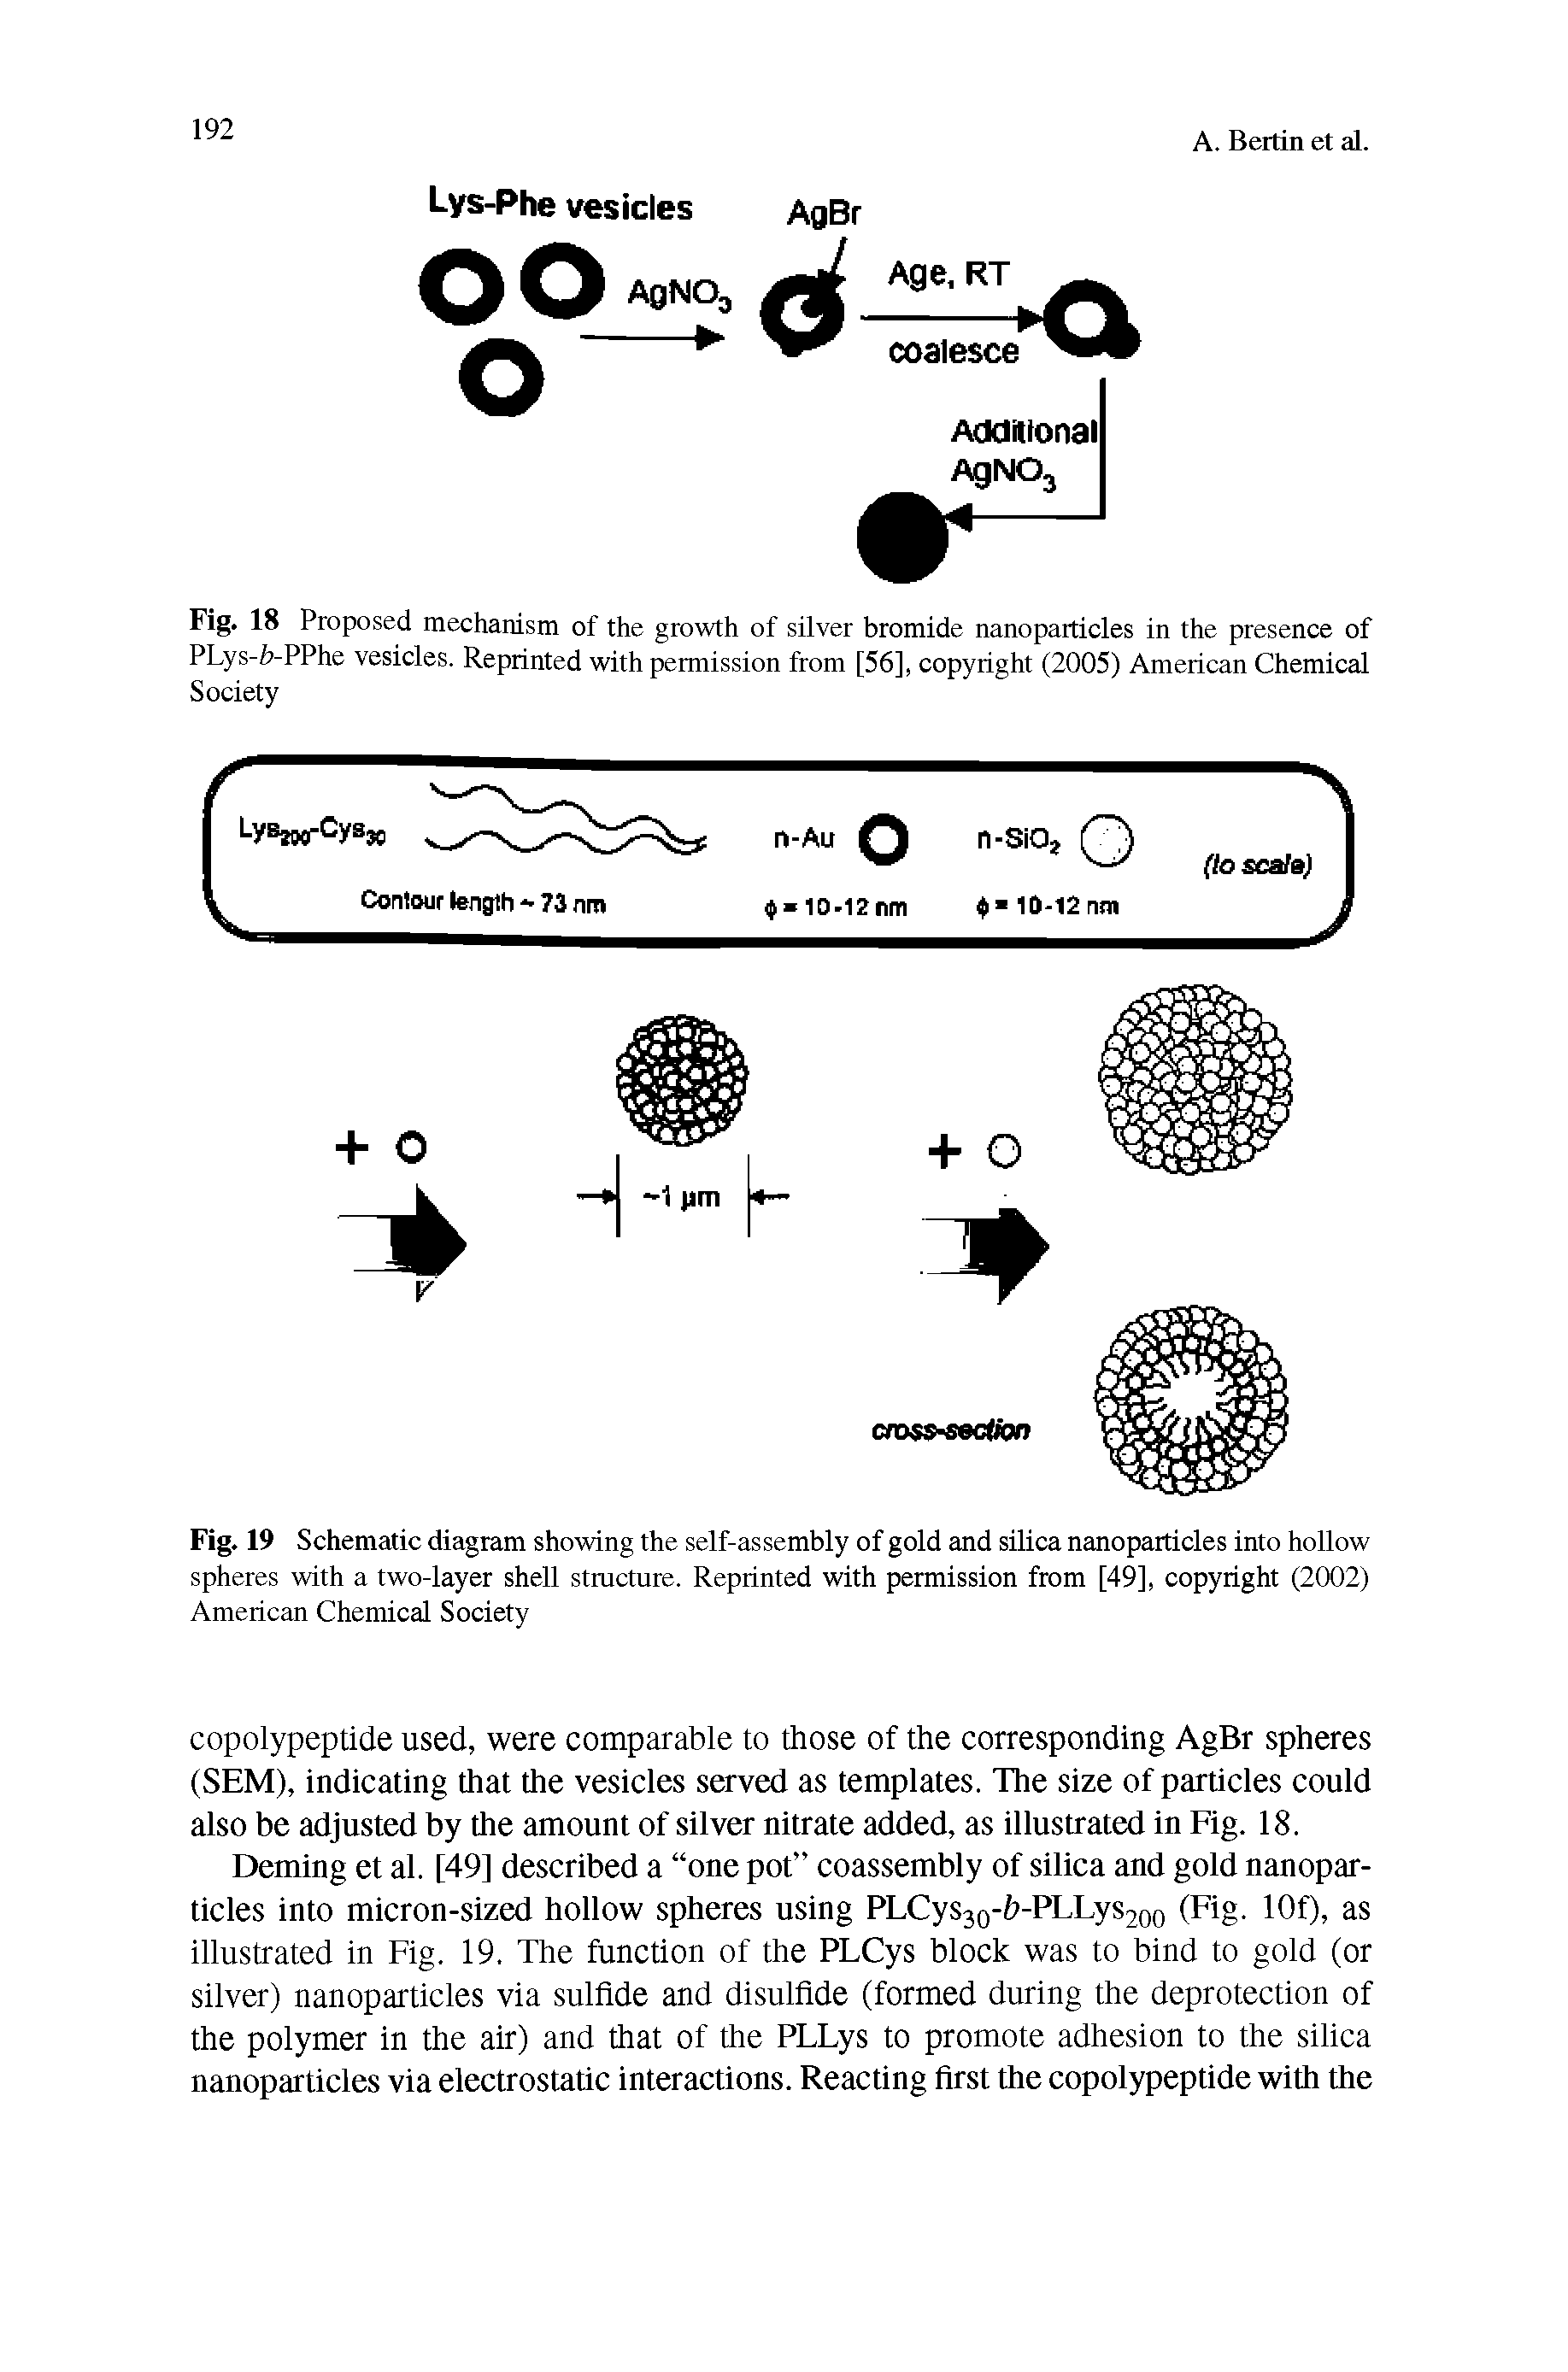 Fig. 19 Schematic diagram showing the self-assembly of gold and silica nanoparticles into hollow spheres with a two-layer shell structure. Reprinted with permission from [49], copyright (2002) American Chemical Society...